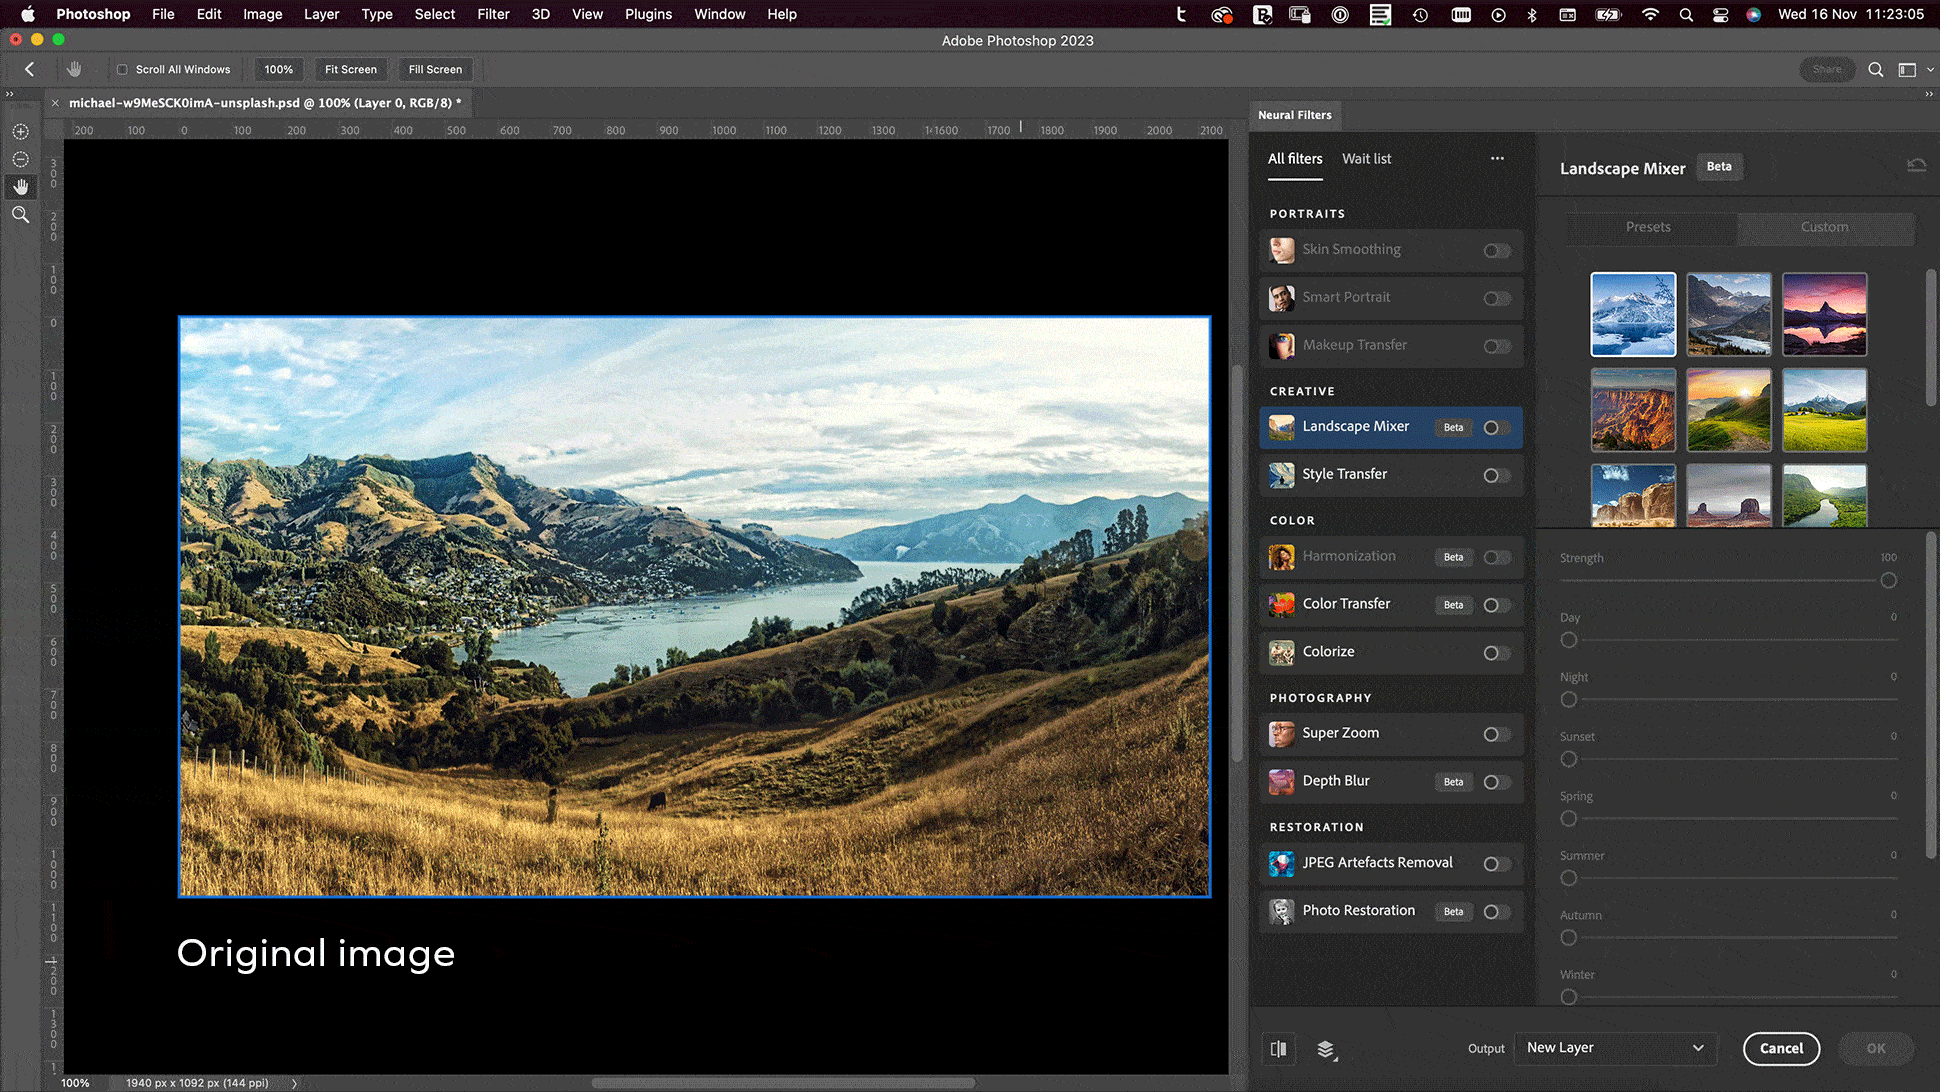  Landscape with video to show how Adobe Photoshop can change the image using AI